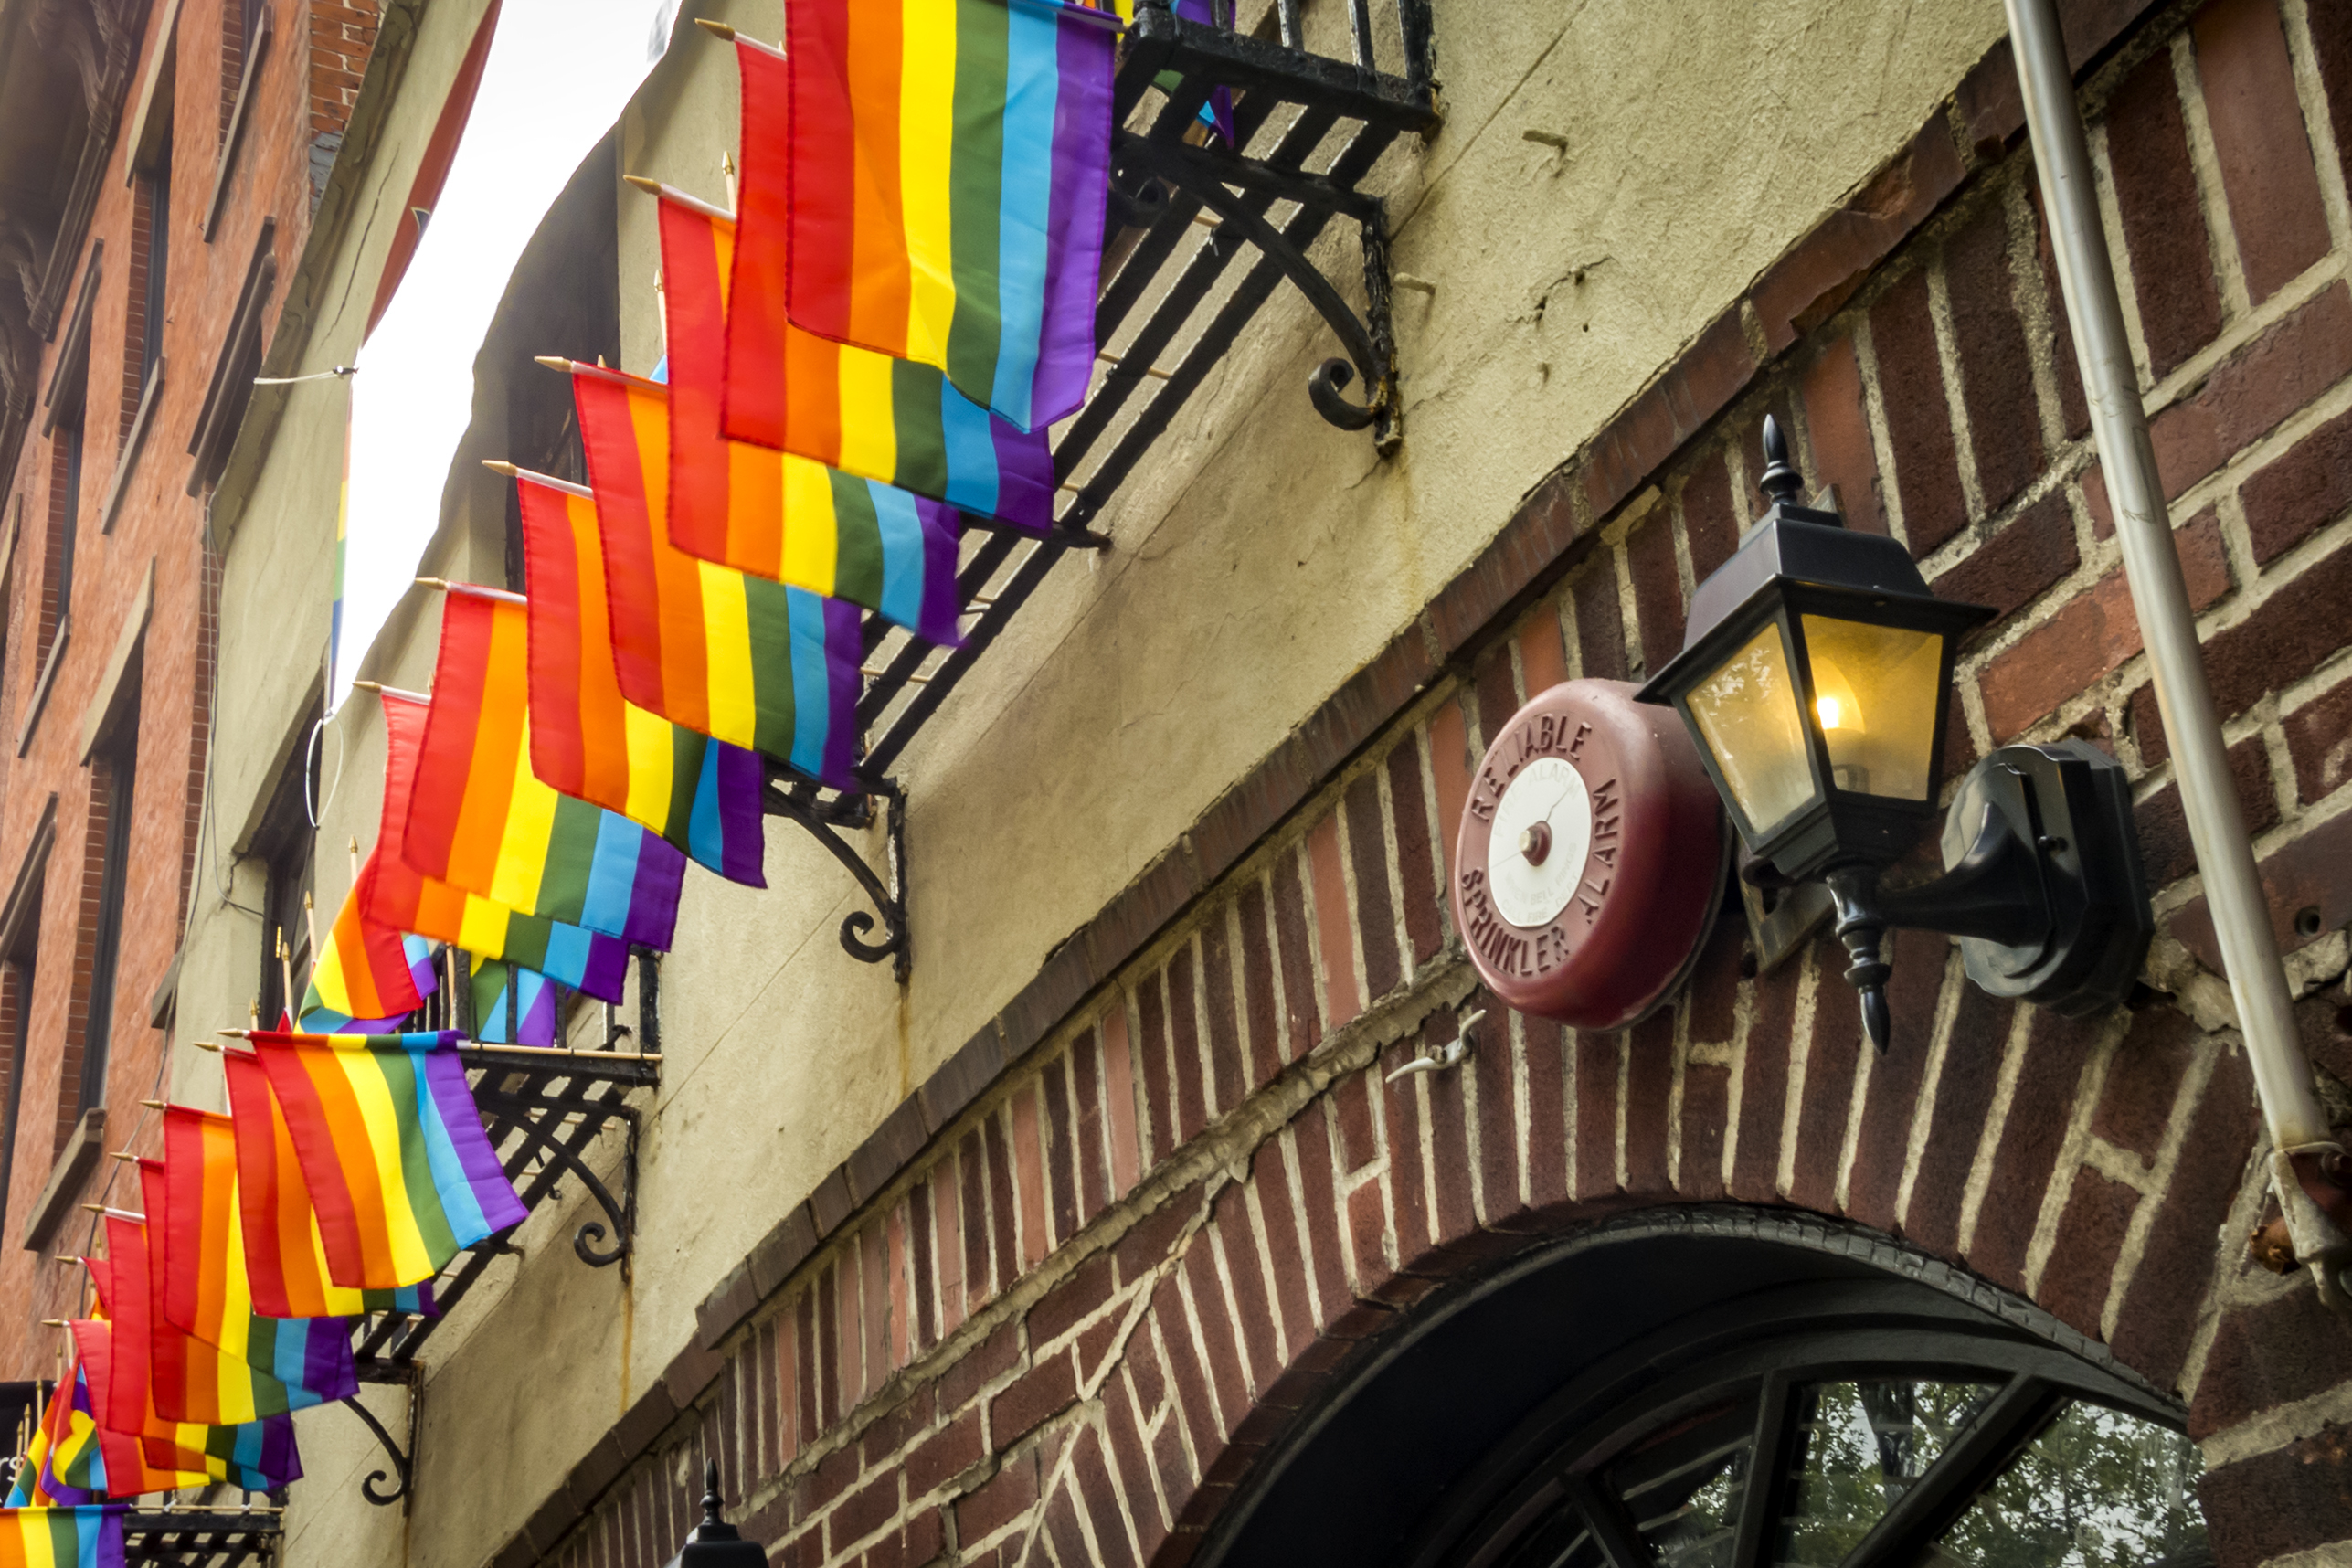 A street view of NYC's Stonewall Inn with rainbow flags.